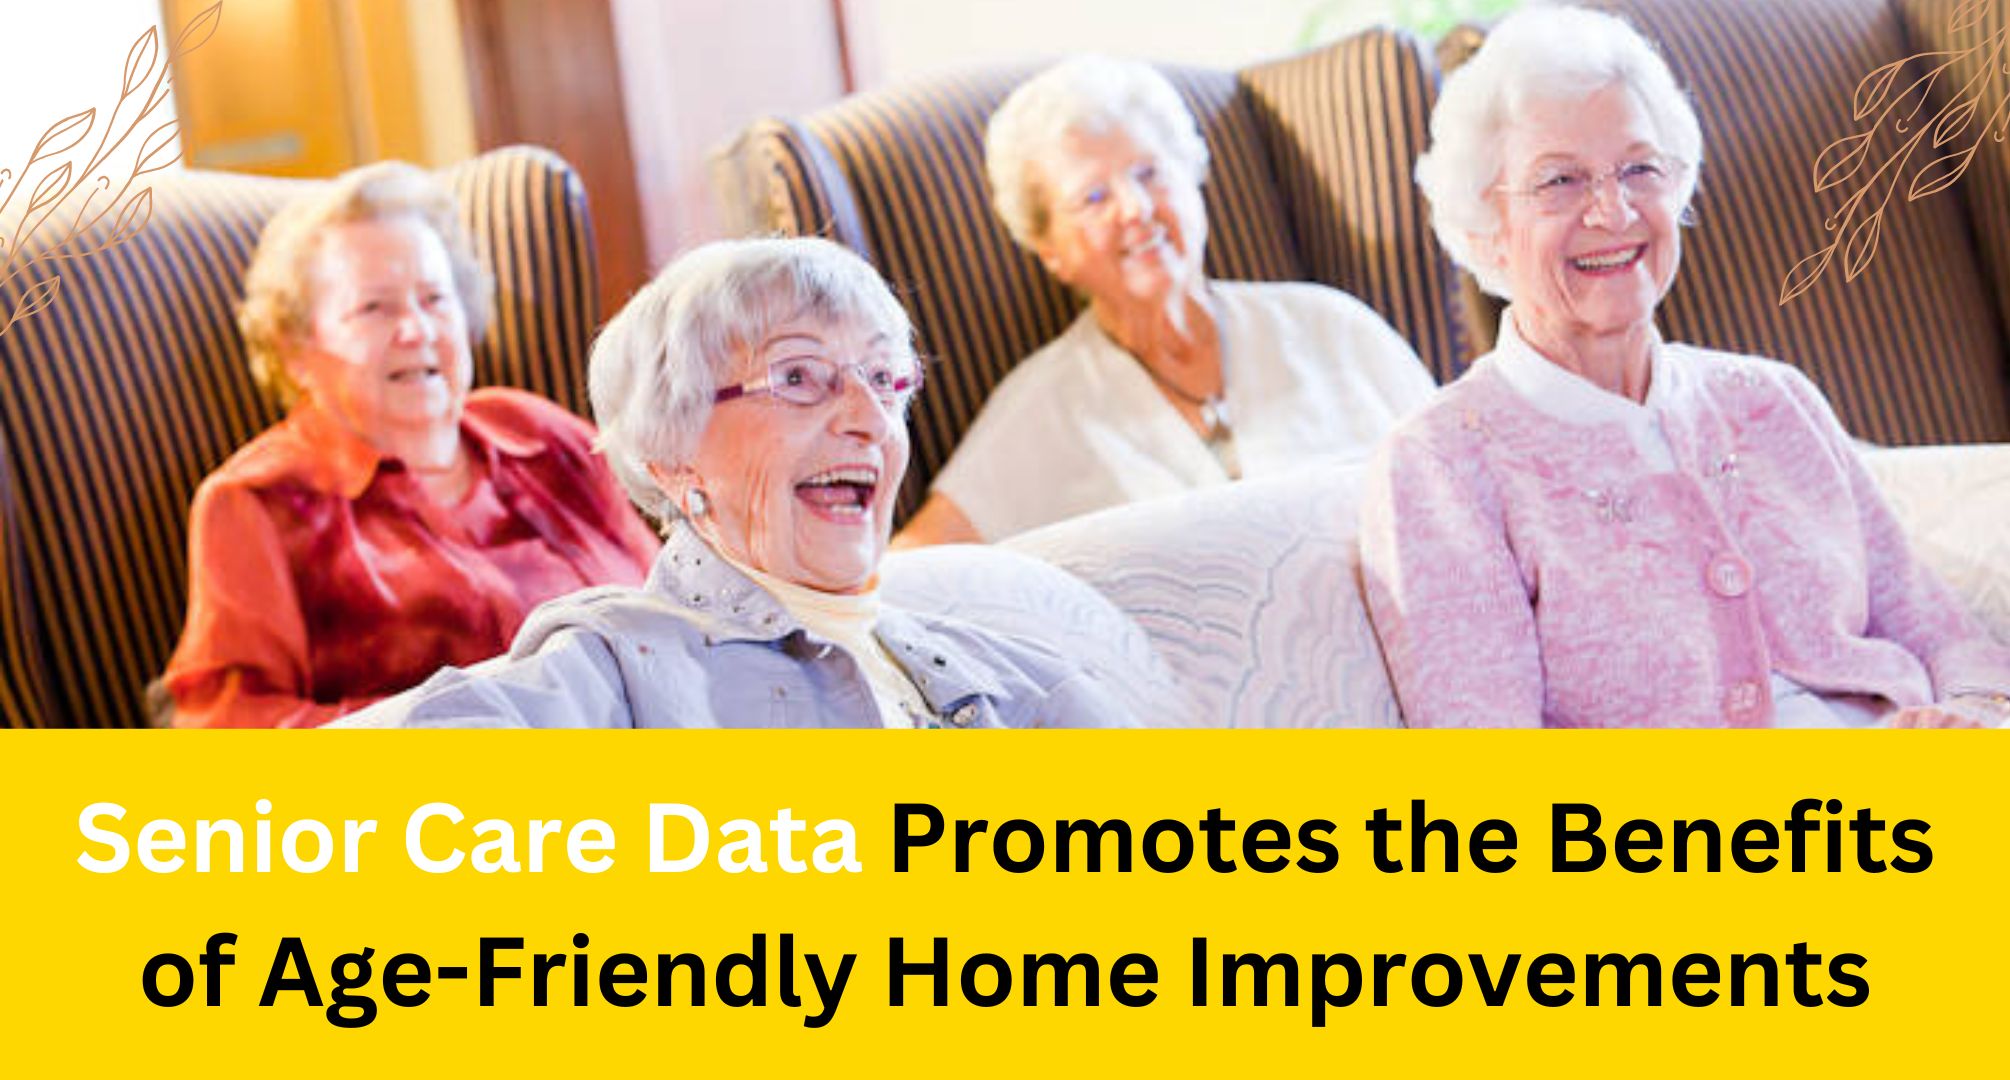 Senior Care Data Promotes the Benefits of Age-Friendly Home Improvements